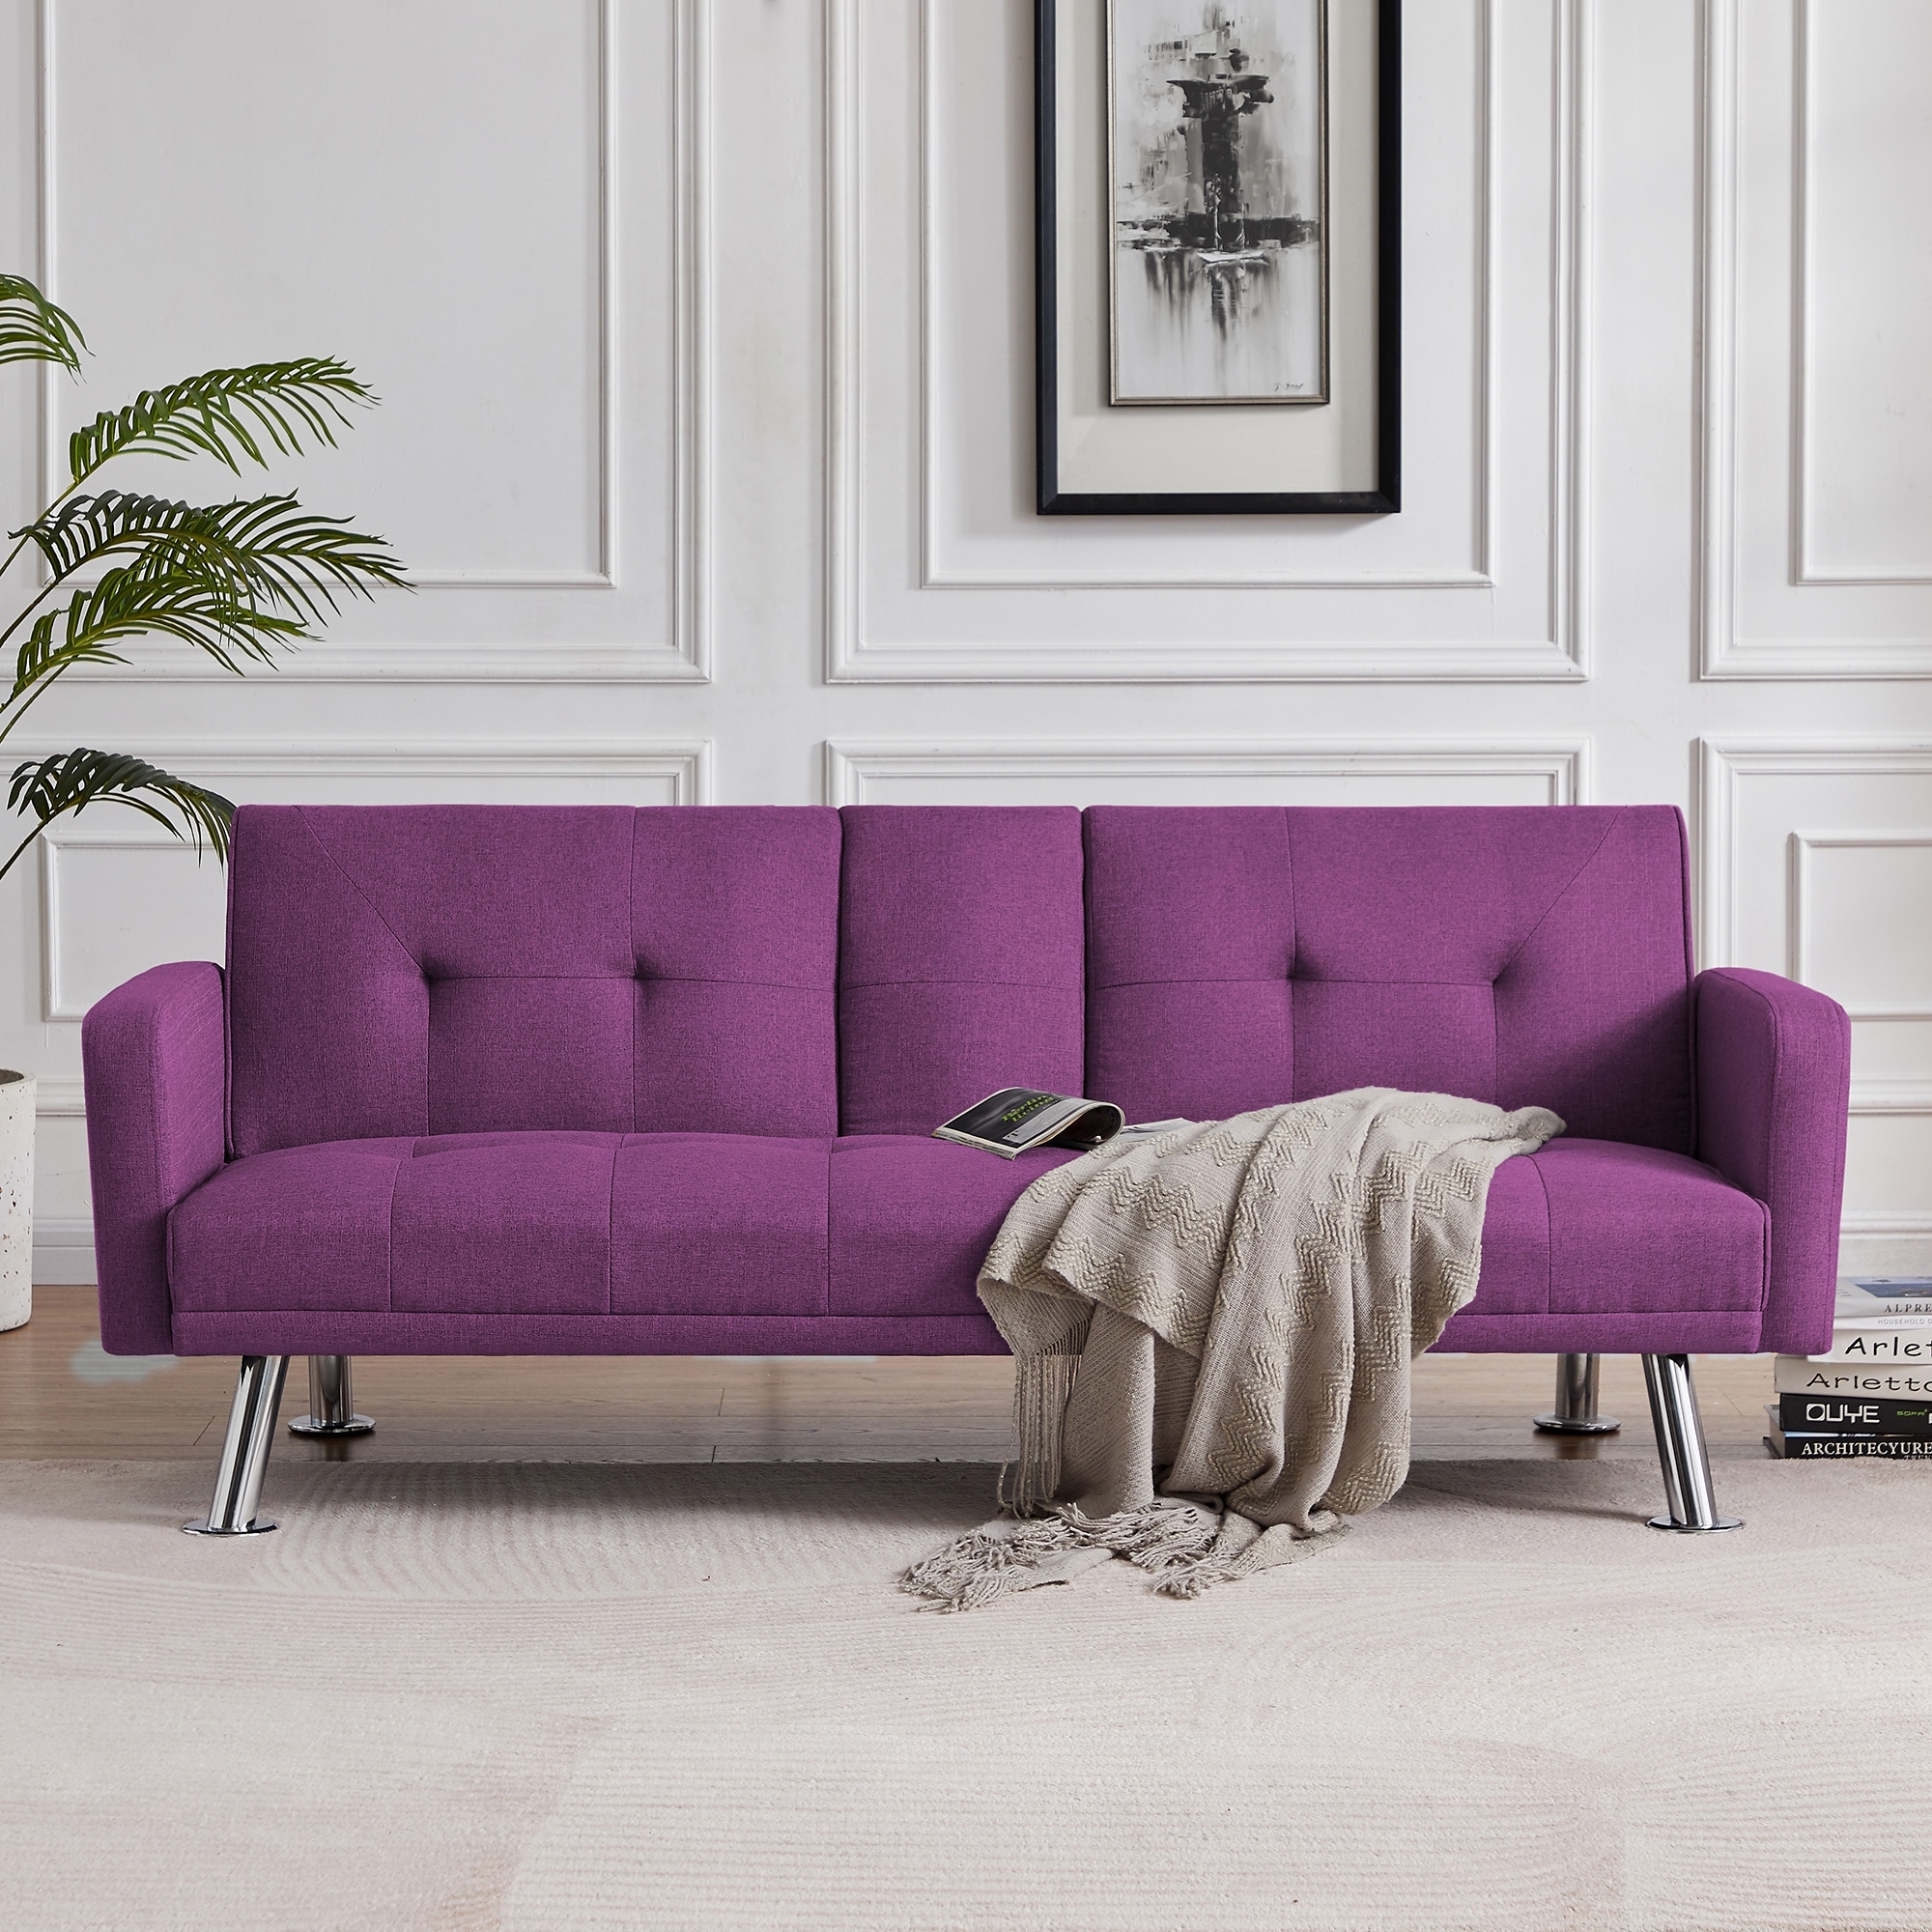 Modern Convertible Folding Sofa Bed with Armrest Fabric Sleeper Adjustable Fabric Sofa Couch with Metal Leg for Living Room - Purple